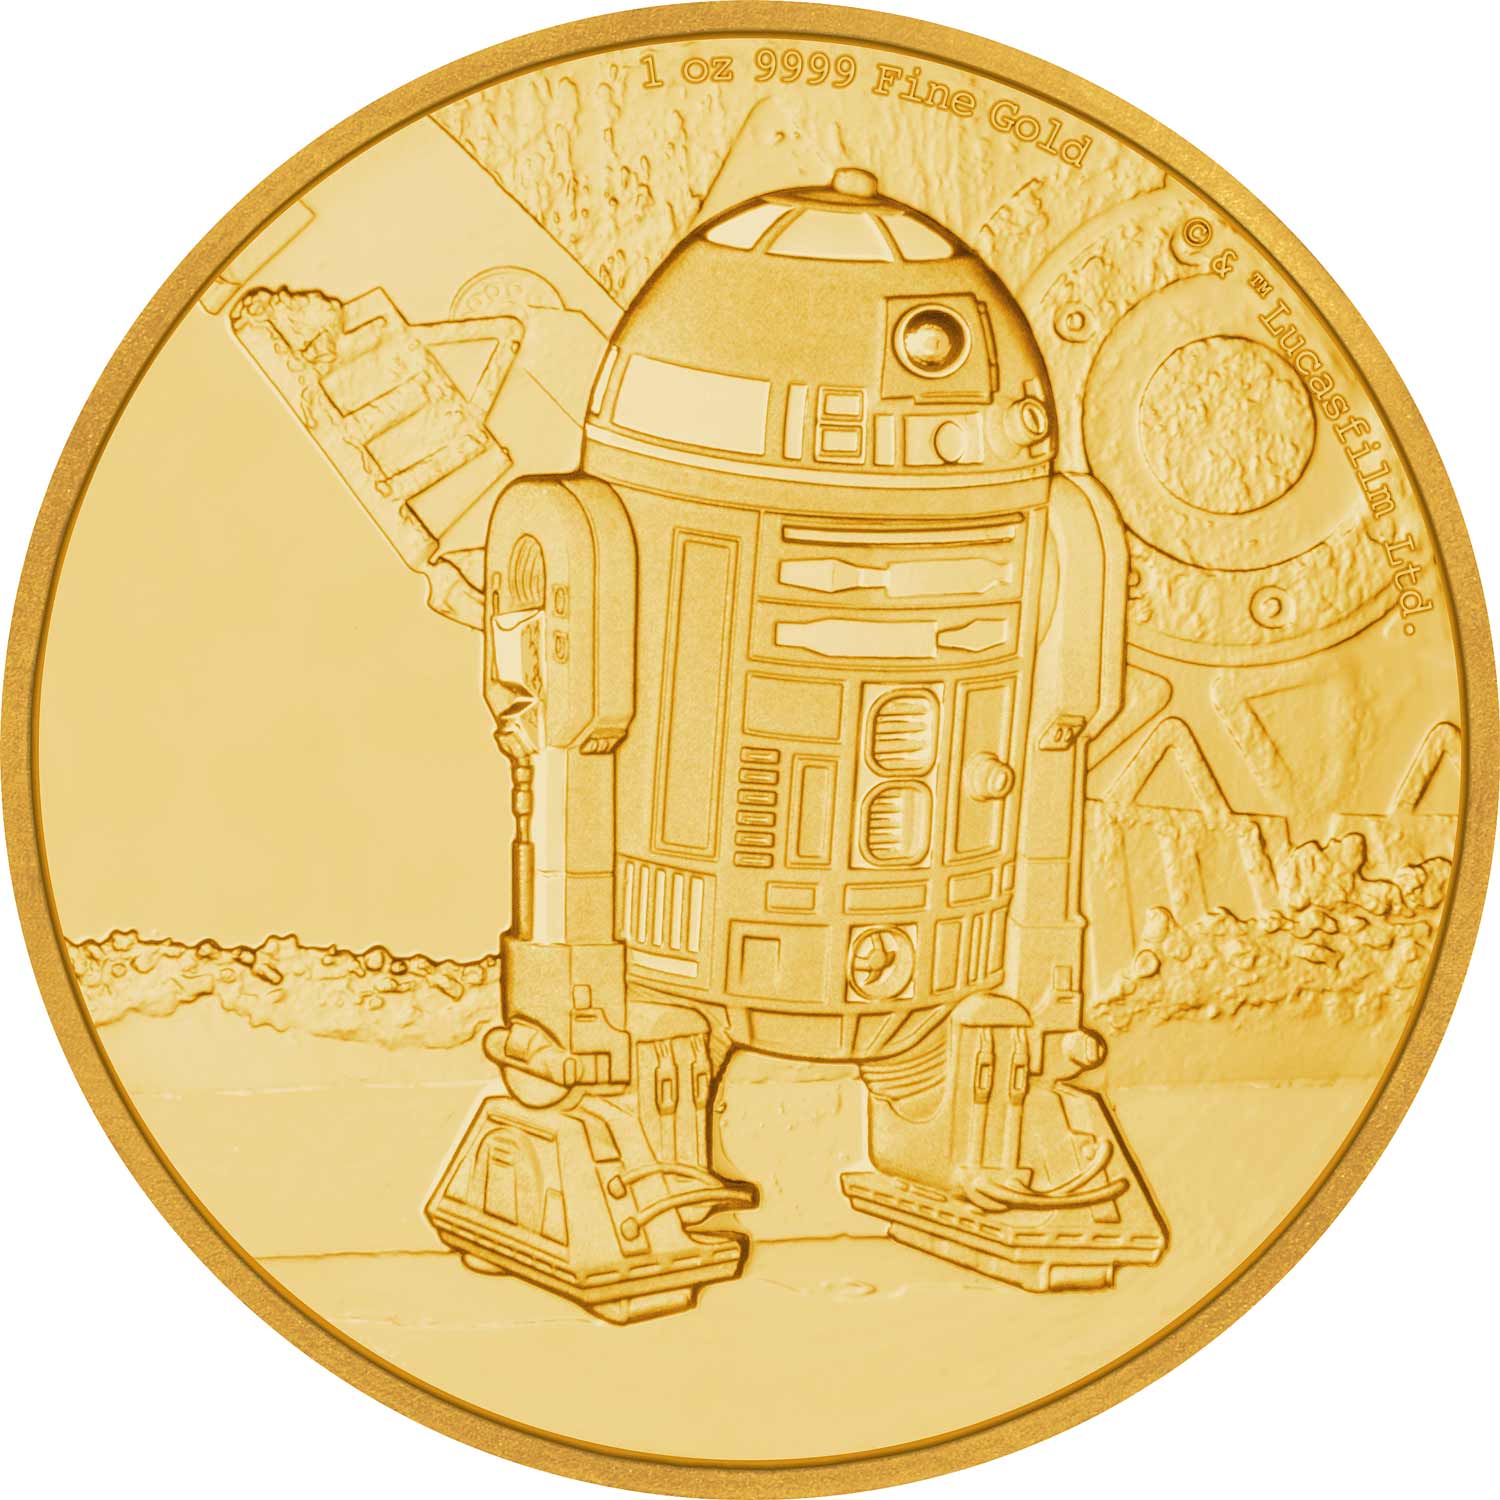 R2-D2 Star Wars Limited Edition 38mm Collectors Coin In Protective Capsule 